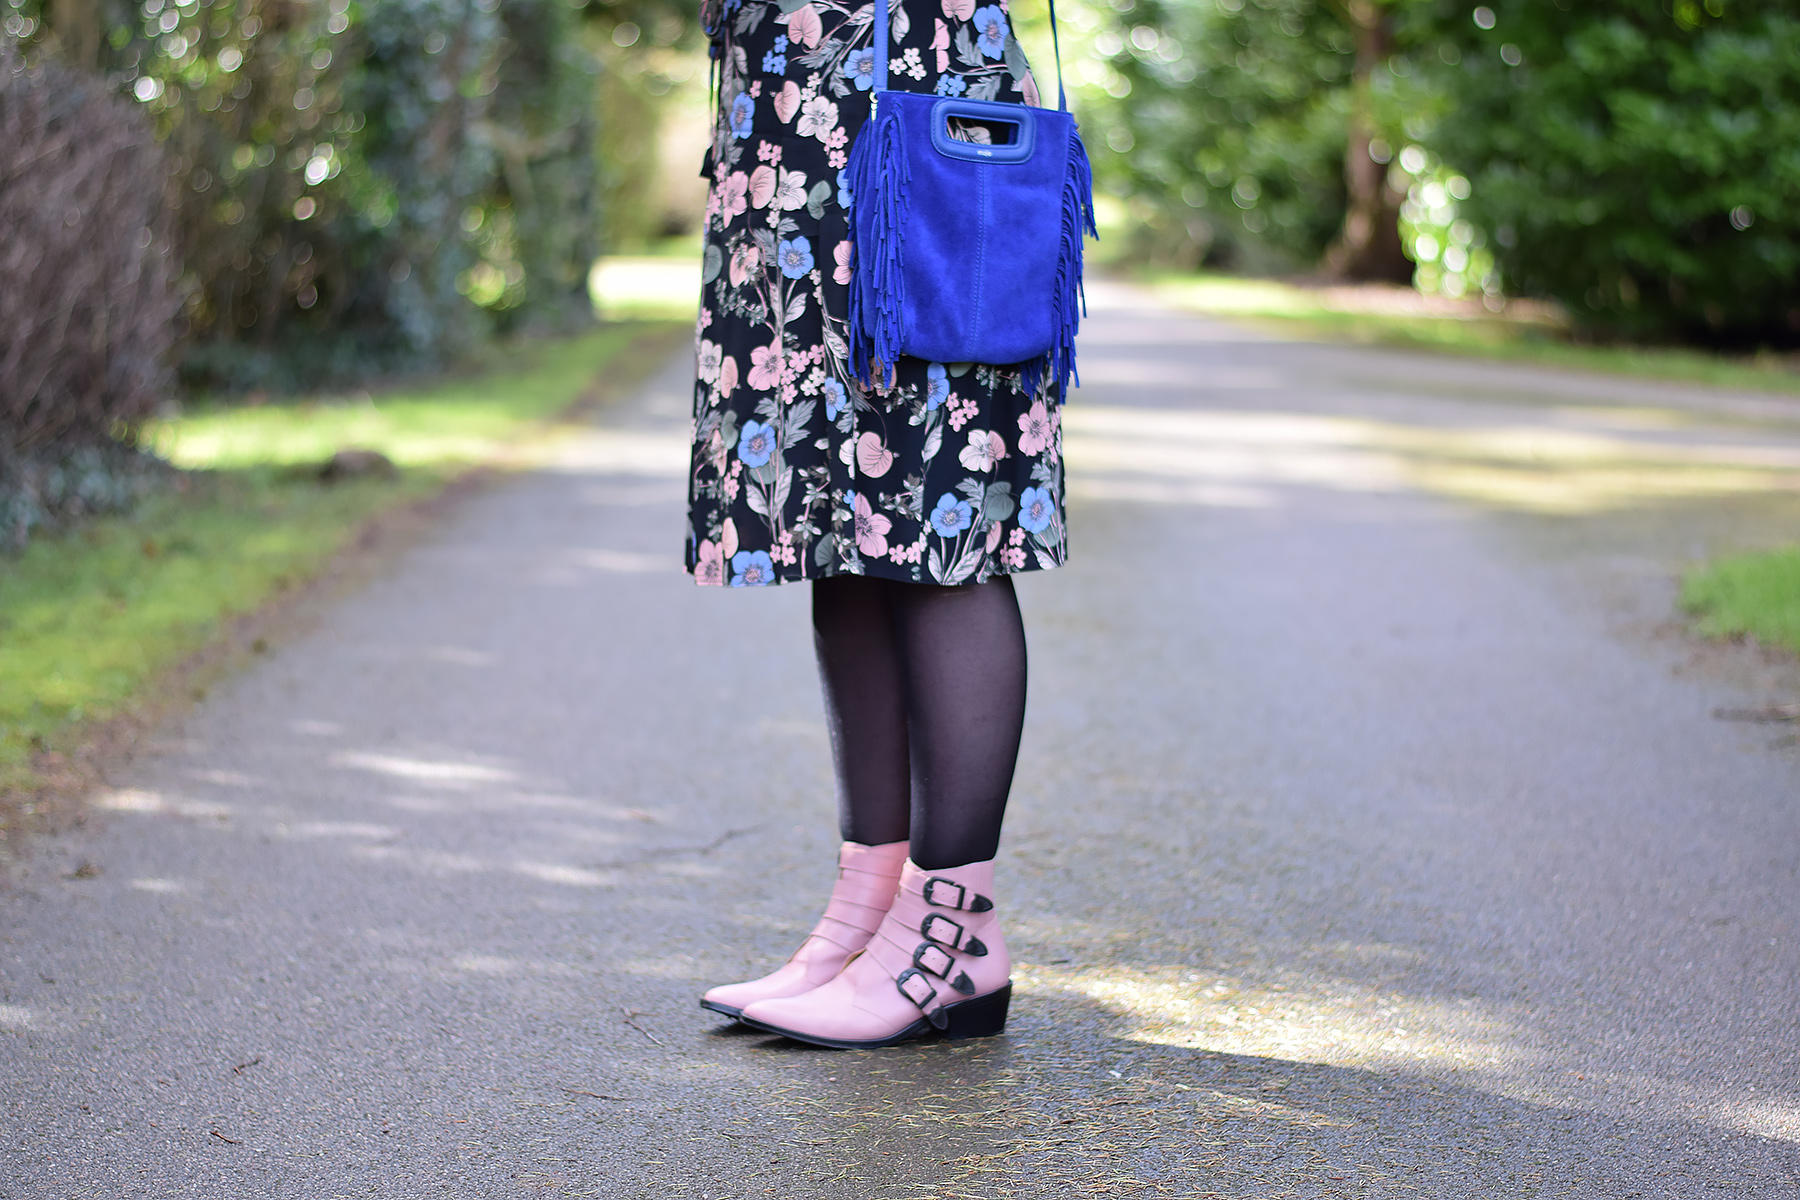 Maje M bag in blue with floral dress